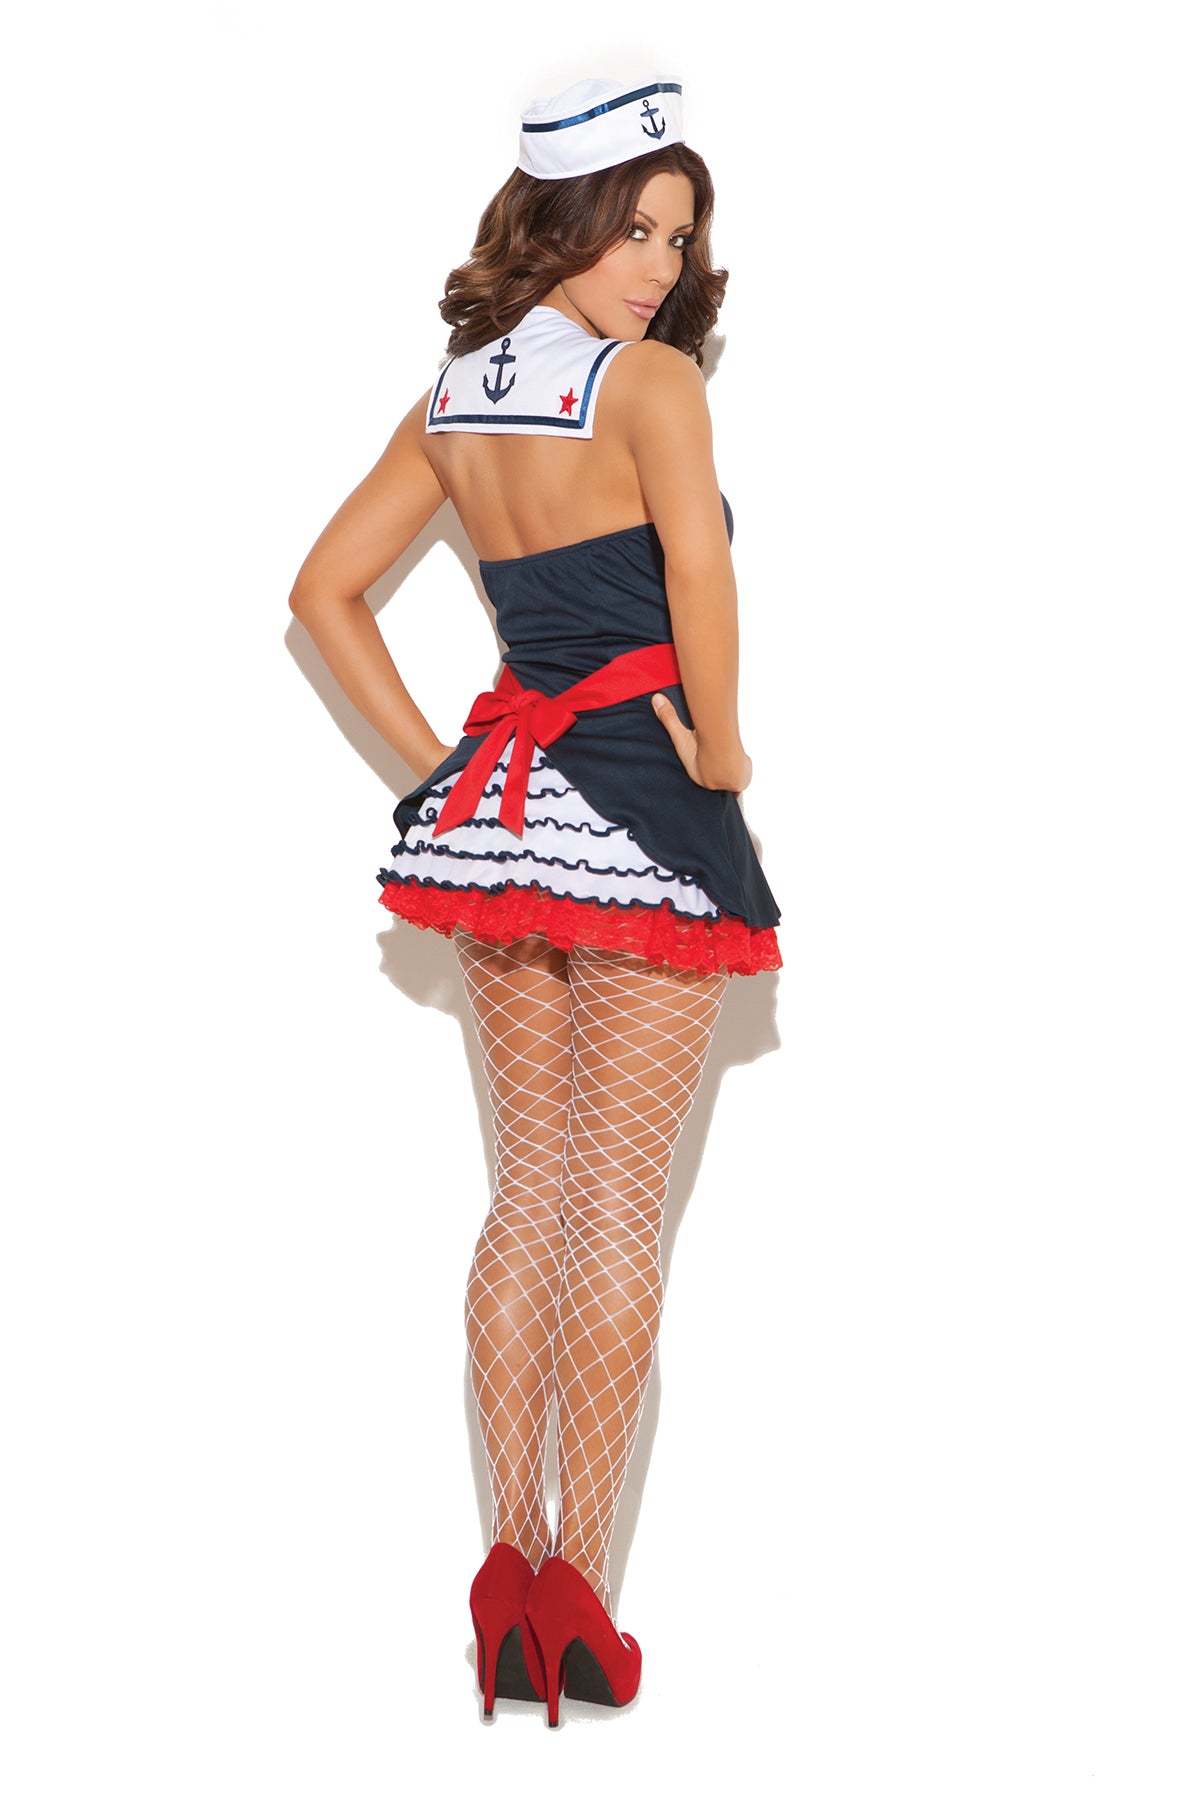 Sailors Delight - 2 Pc, Costume Includes Dress With Attached Collar And Hat